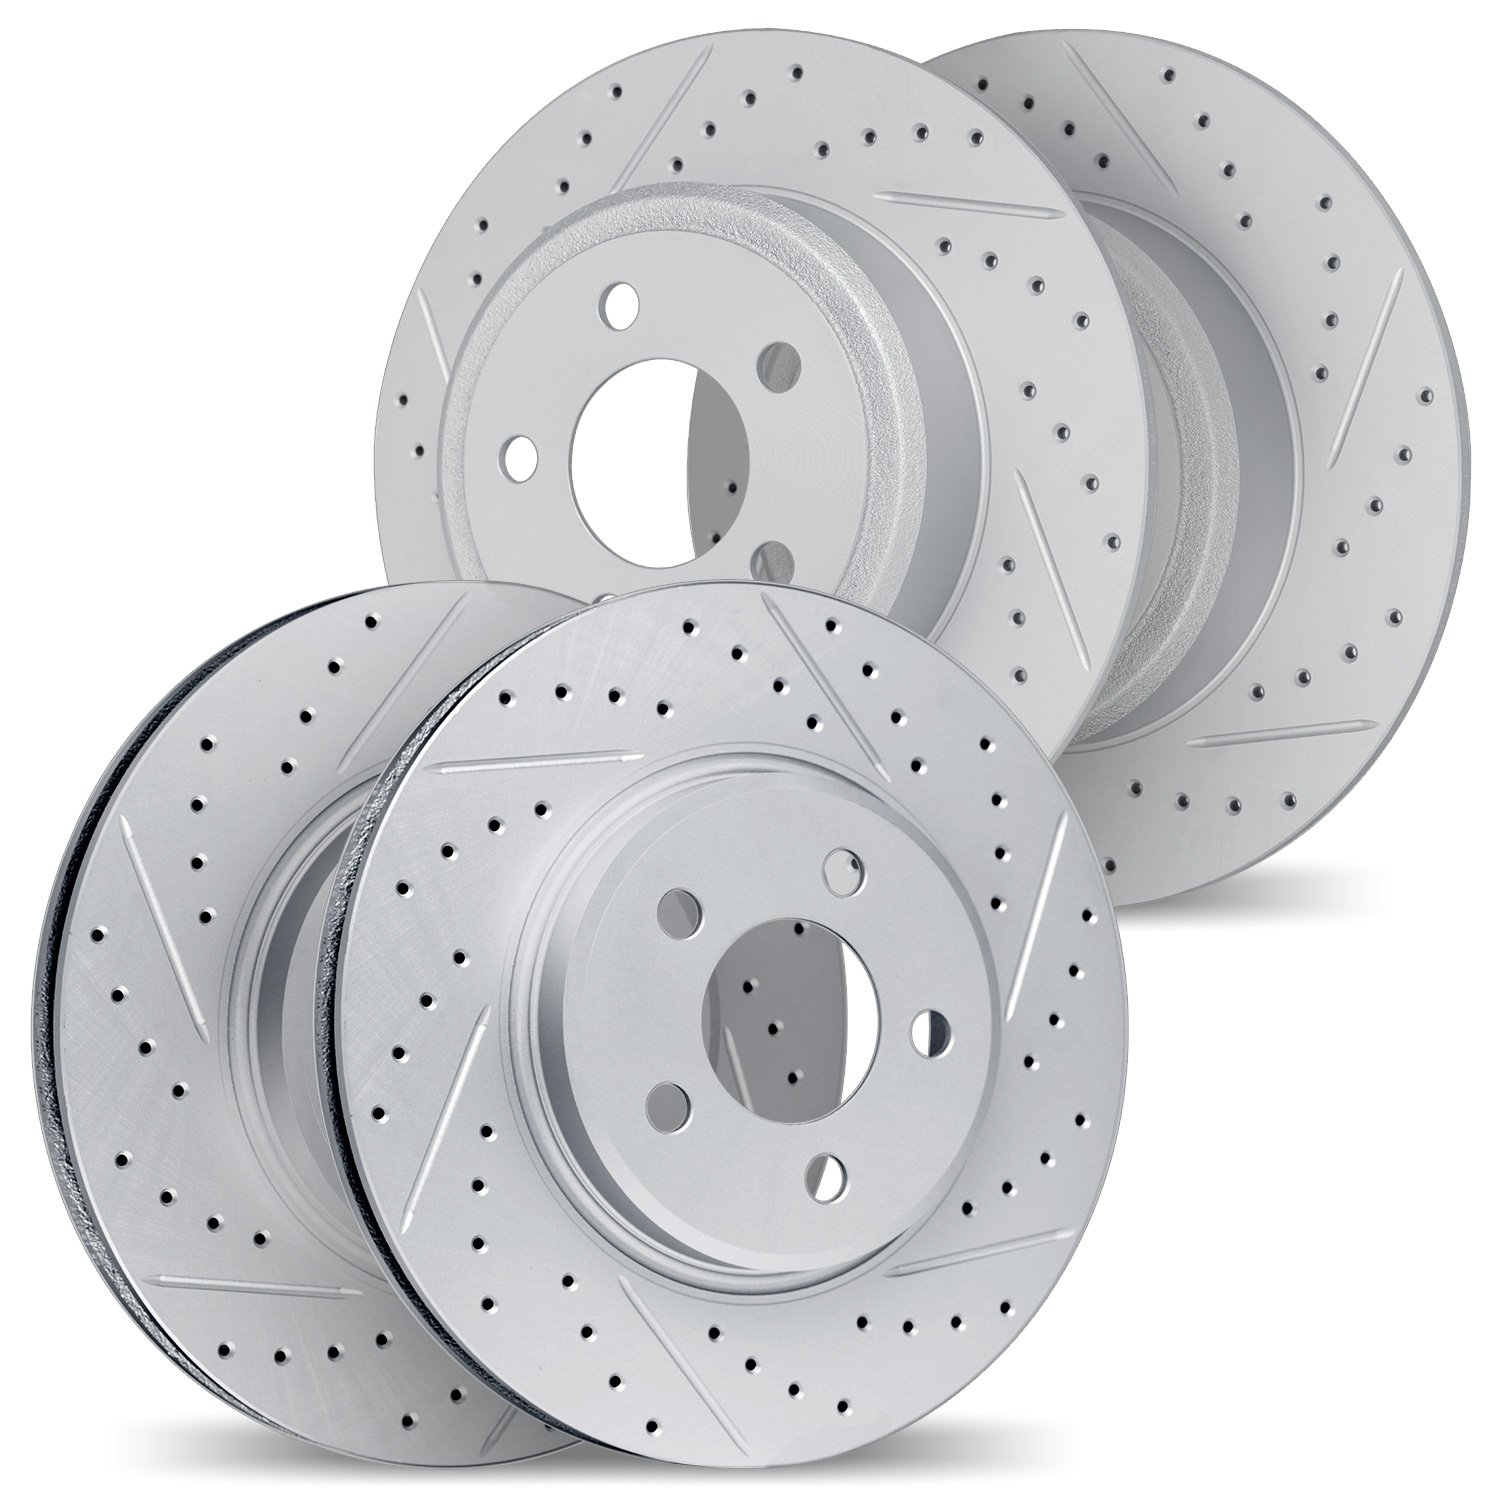 2004-67042 Geoperformance Drilled/Slotted Brake Rotors, 2011-2019 Infiniti/Nissan, Position: Front and Rear